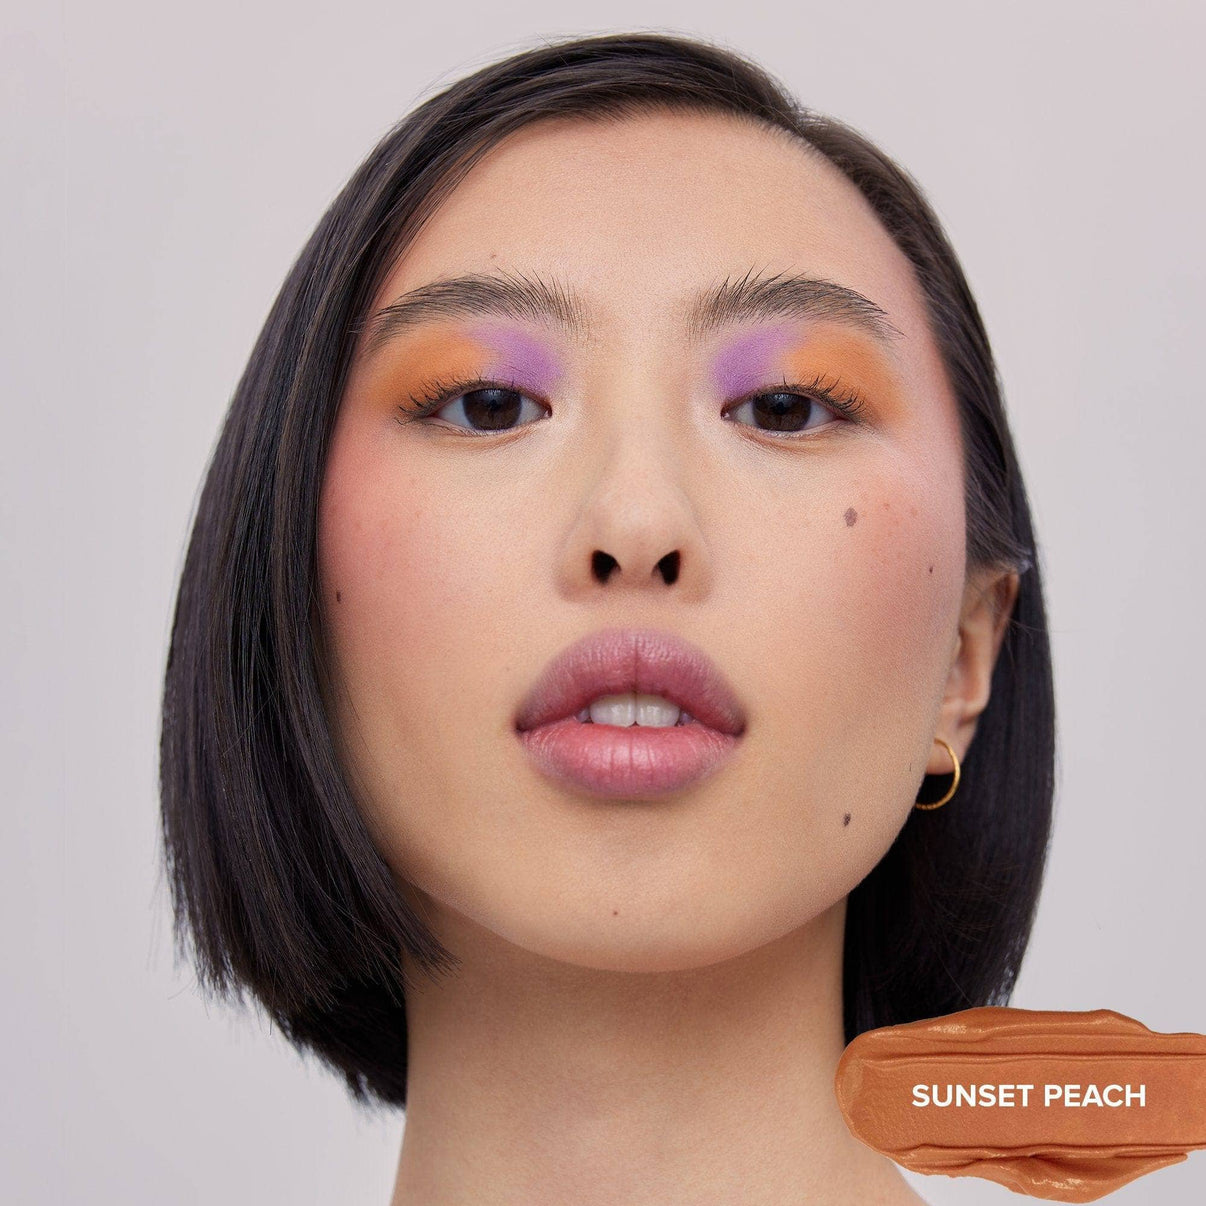 Face makeup with Magnetic Plush Paints in shade sunset peach